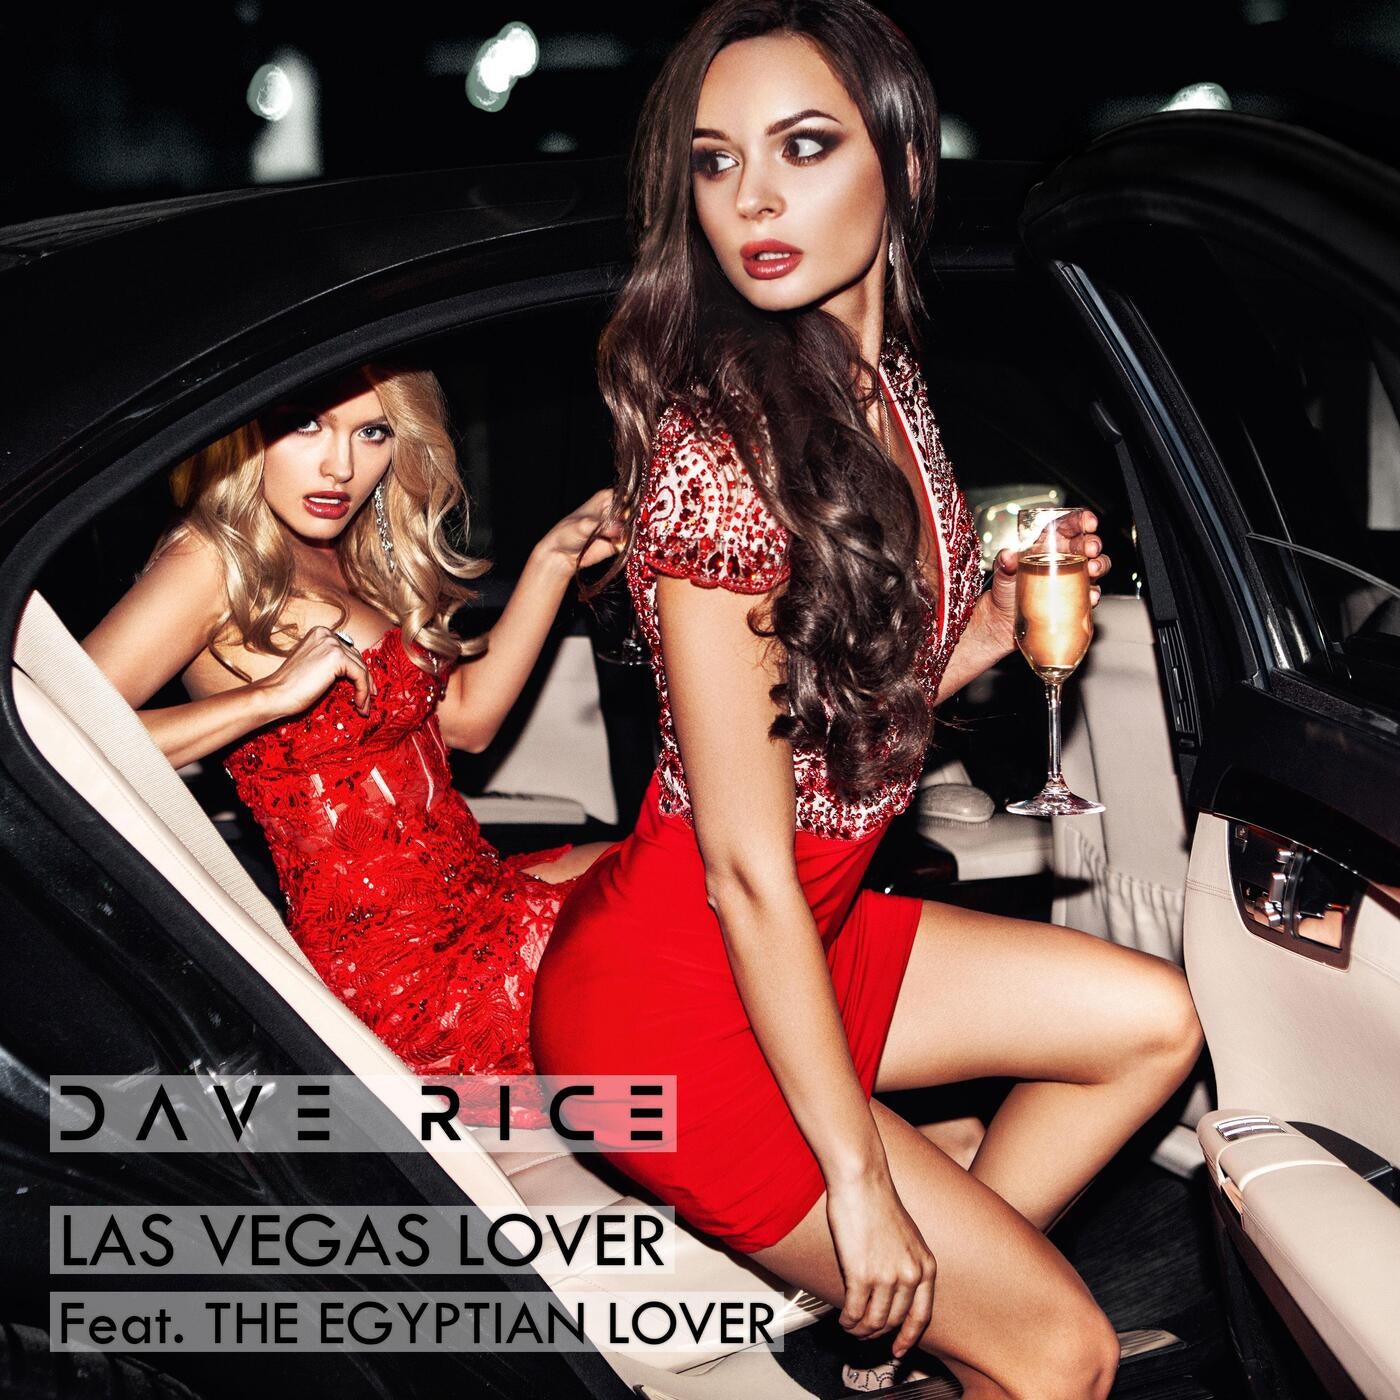 Las Vegas Lover (feat. The Egyptian Lover)